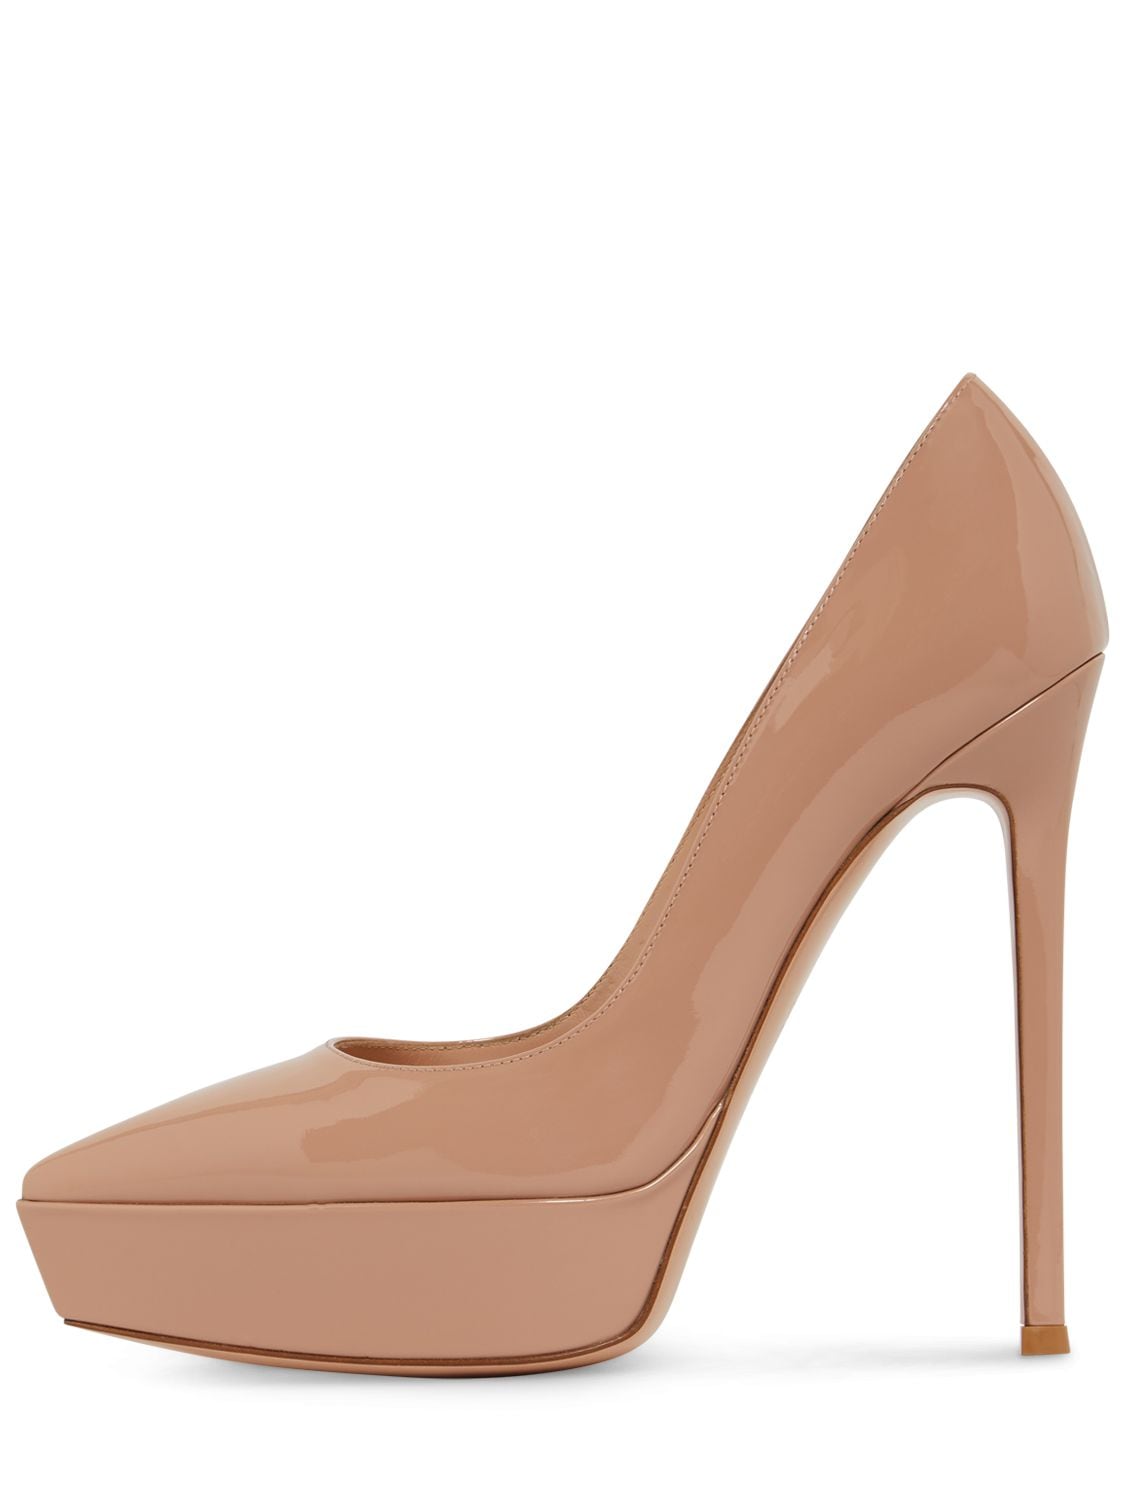 Gianvito Rossi 105mm Patent Leather Pumps In Blush